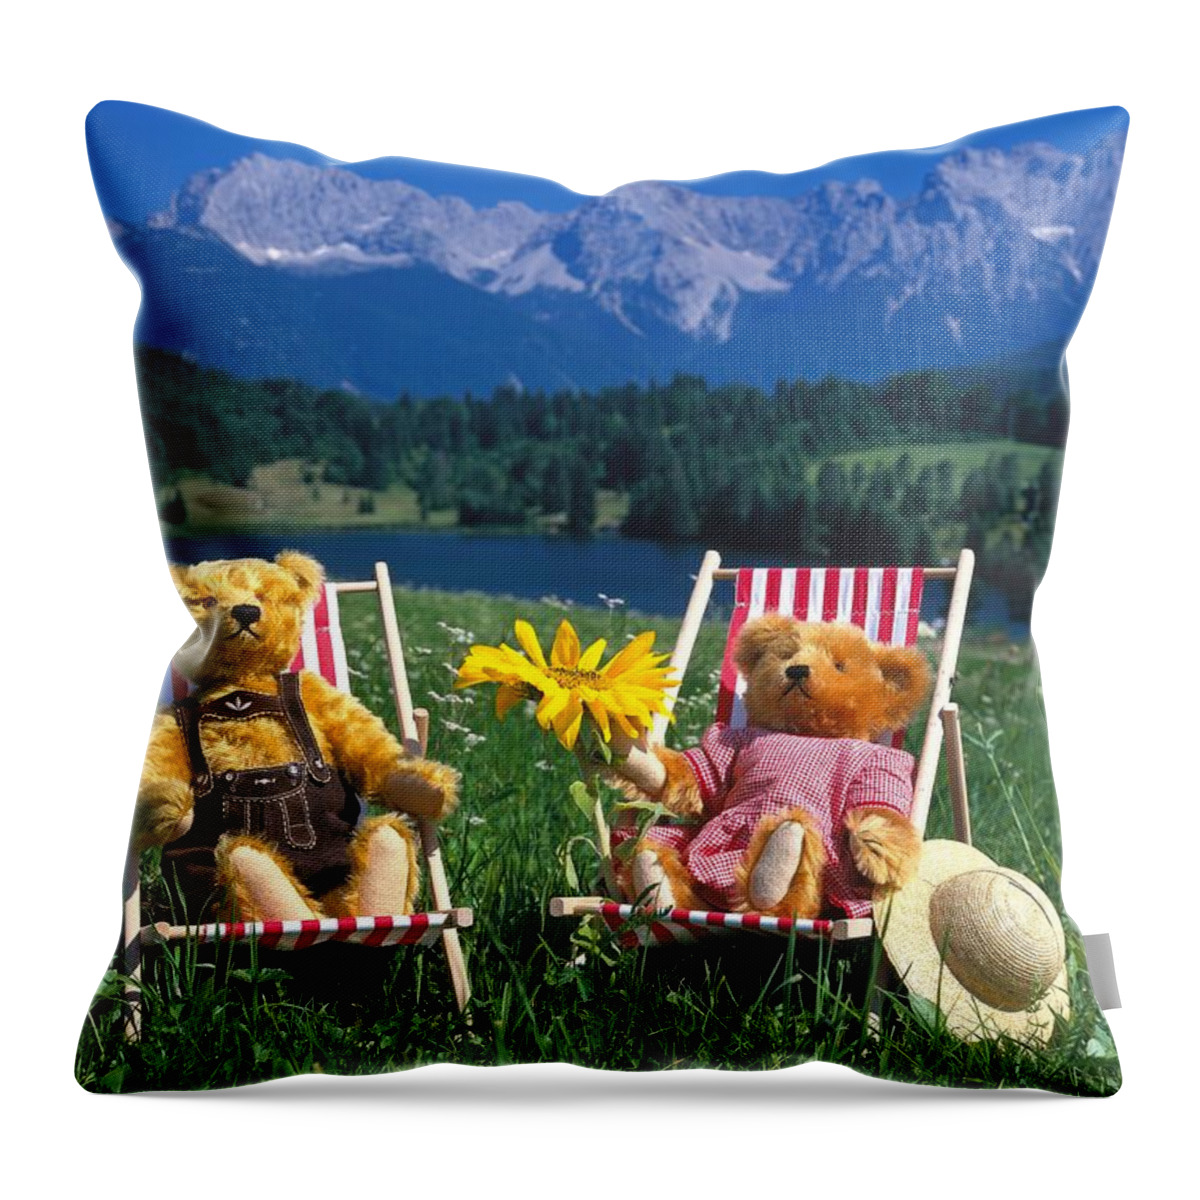 Estock Throw Pillow featuring the digital art Teddy Bears Lounging by Hp Huber